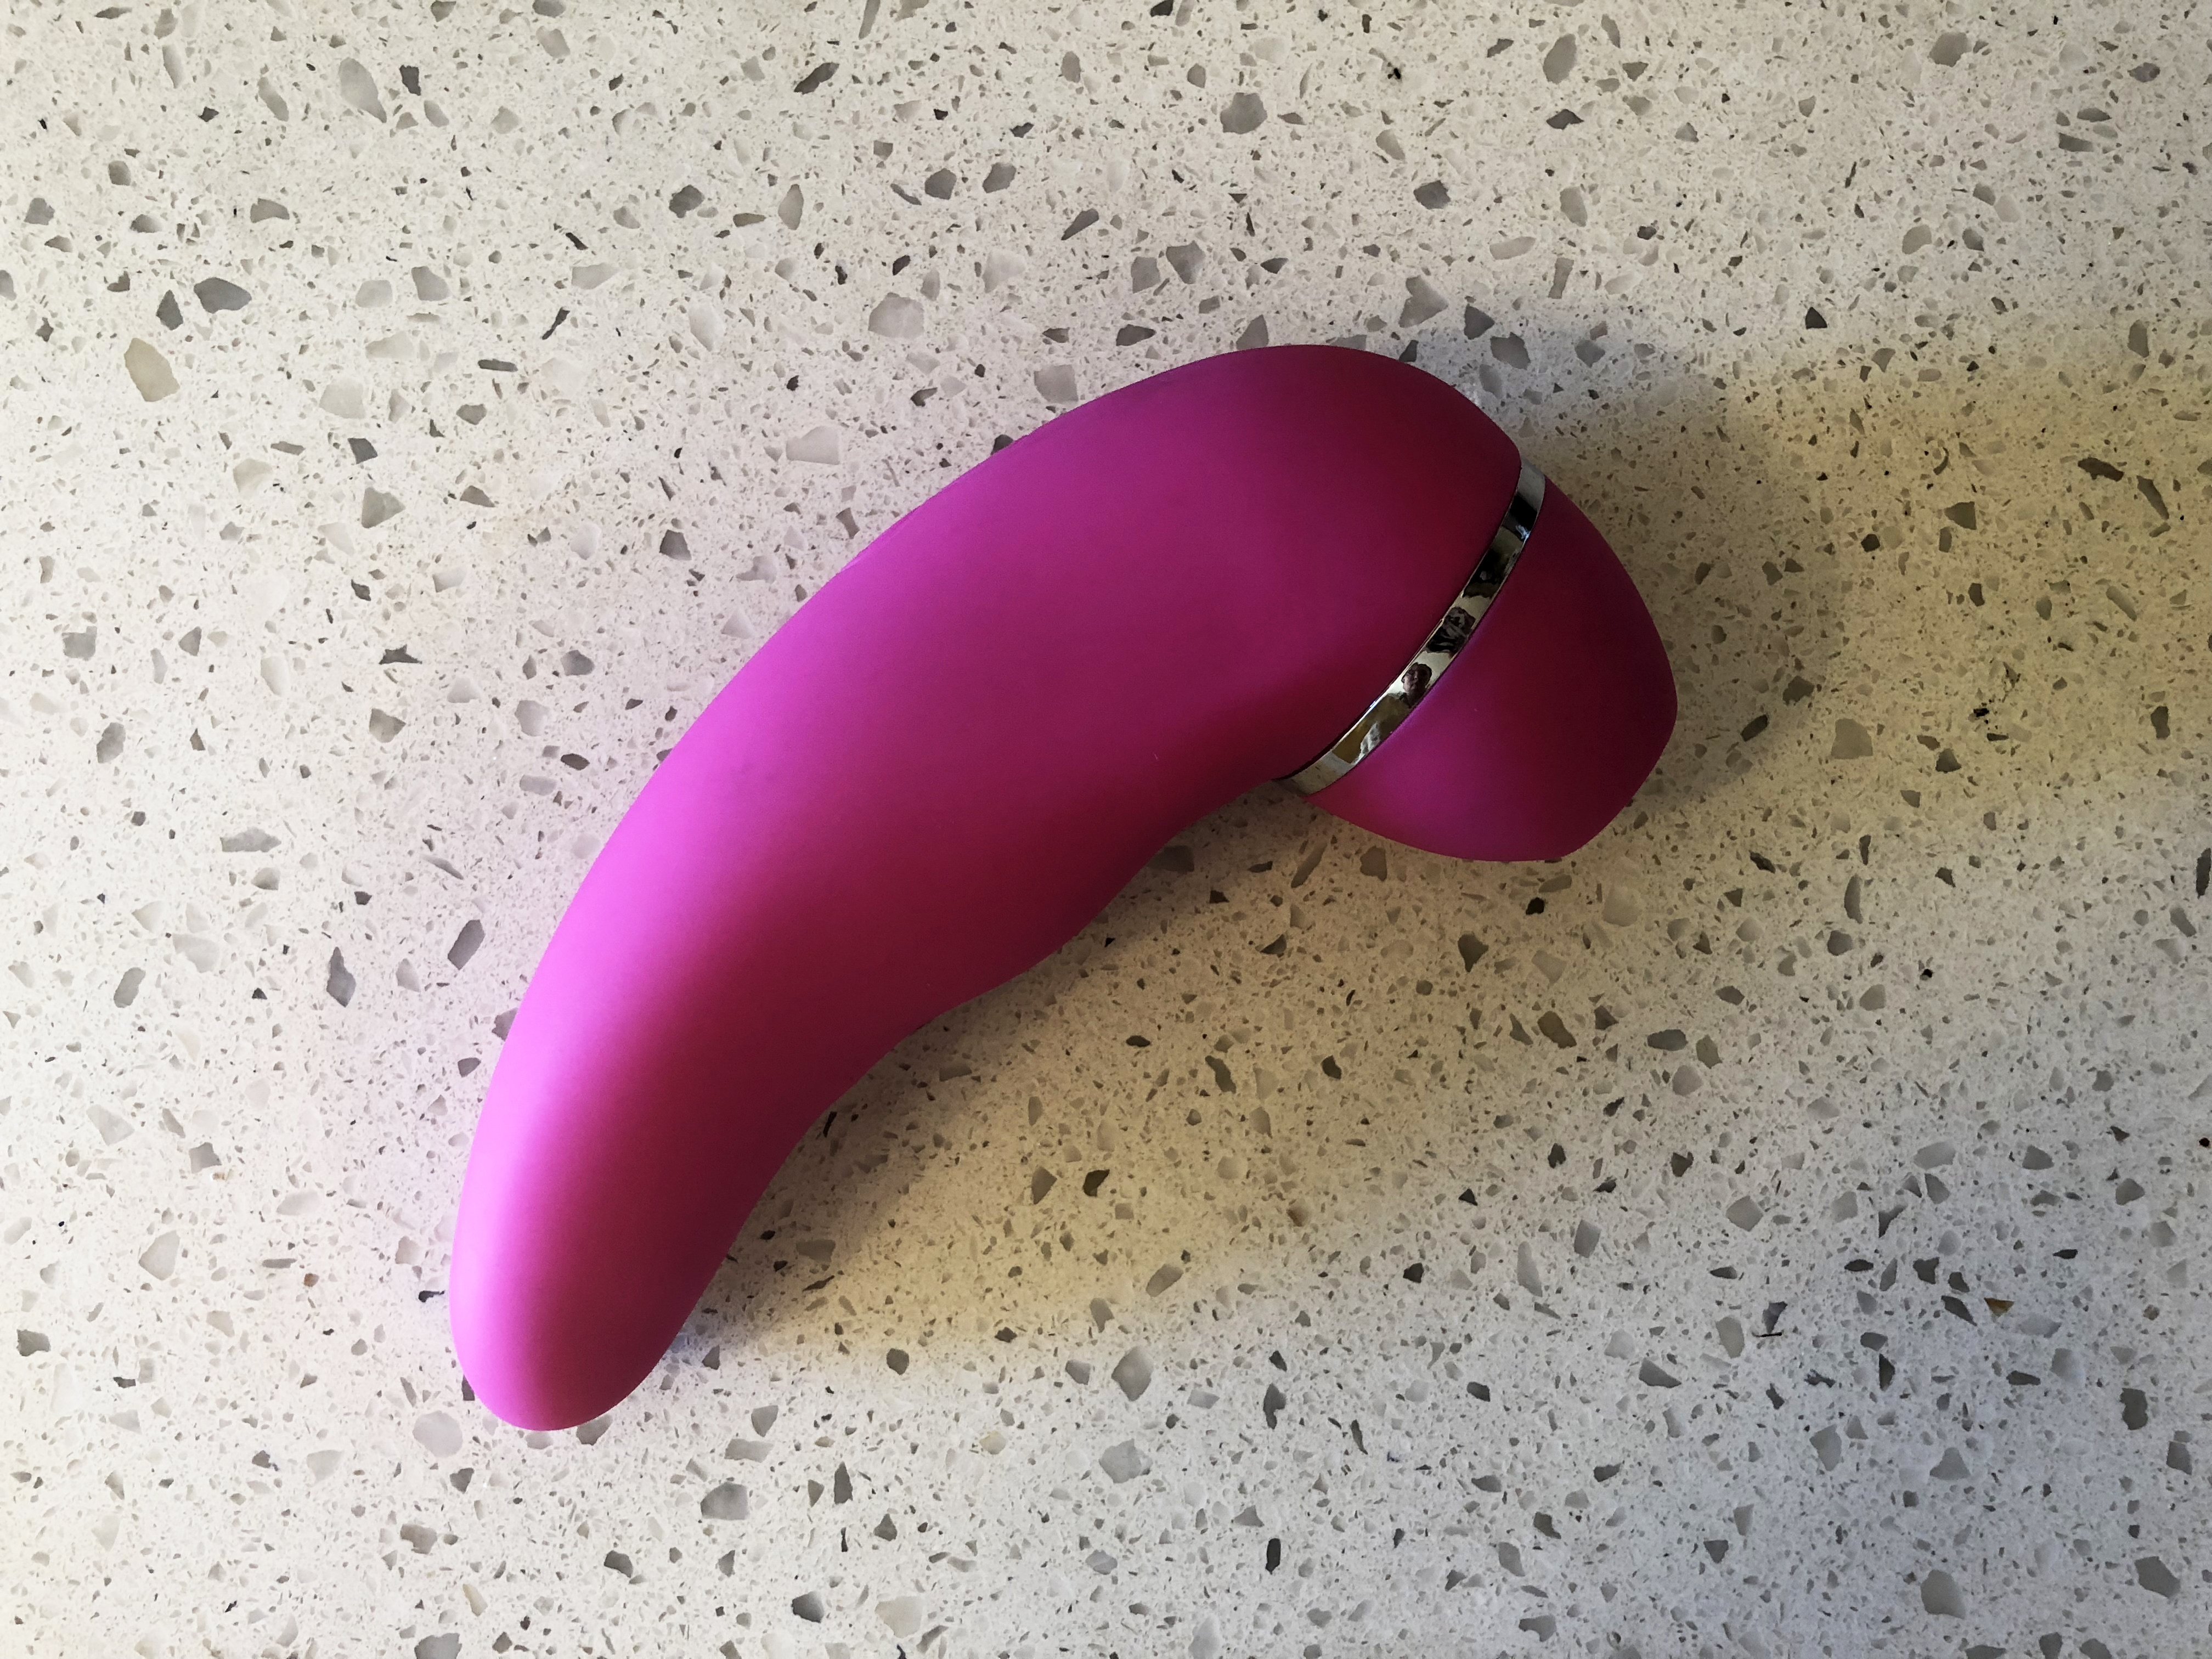 Must see sex toy invention